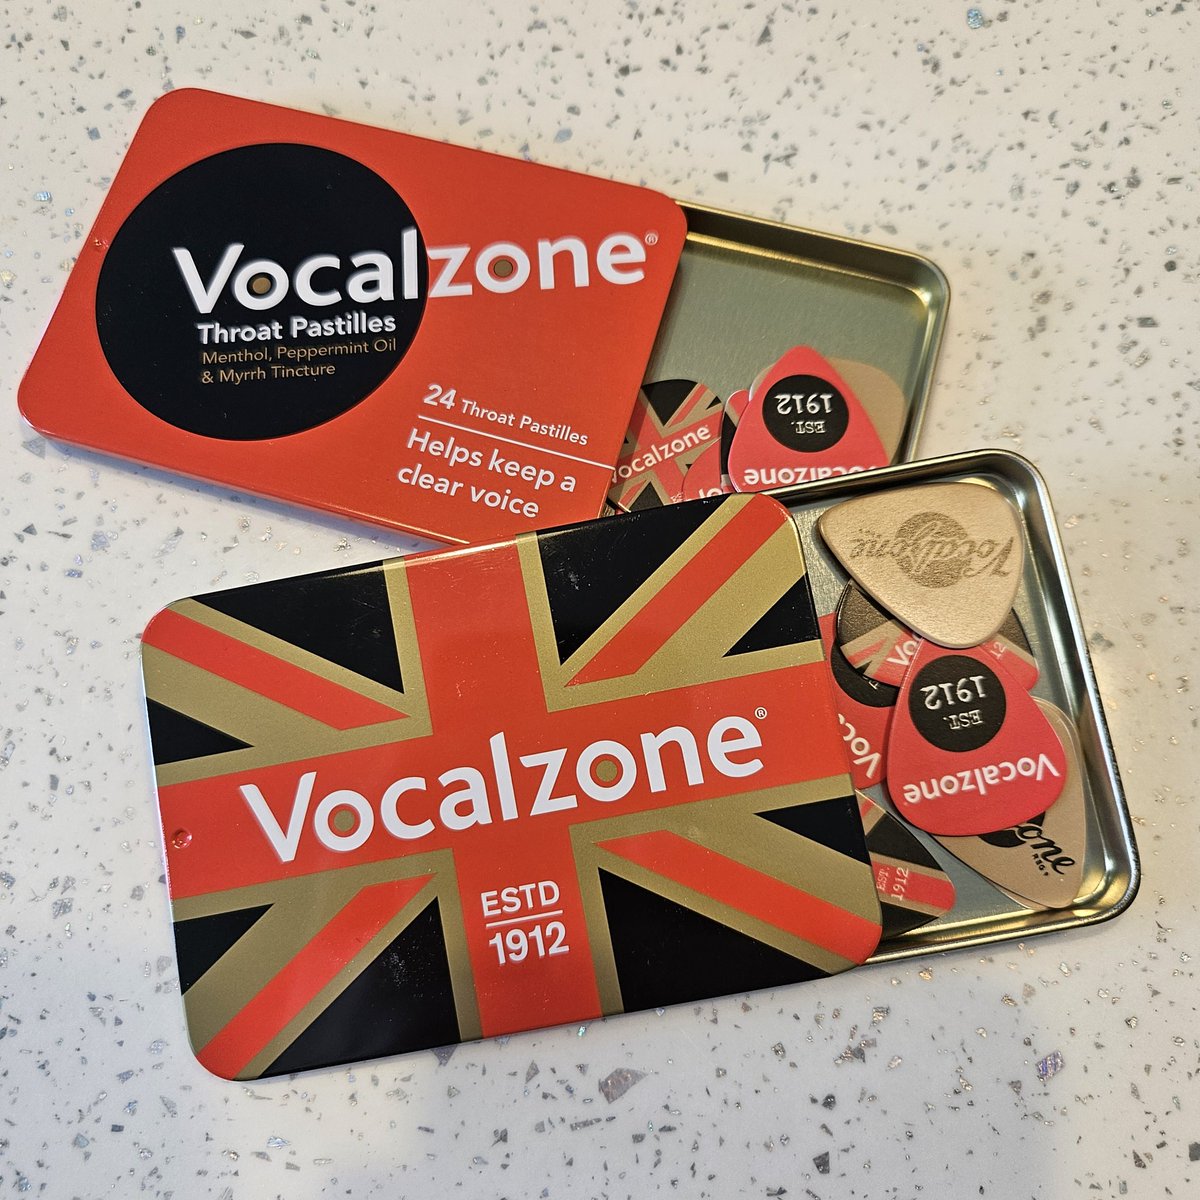 Ooh, Vocalzone do guitar picks (and fancy tins) as well! @VocalzoneHQ #voice #throat #medication #singing #vocalist #music #pastilles #tea #guitar